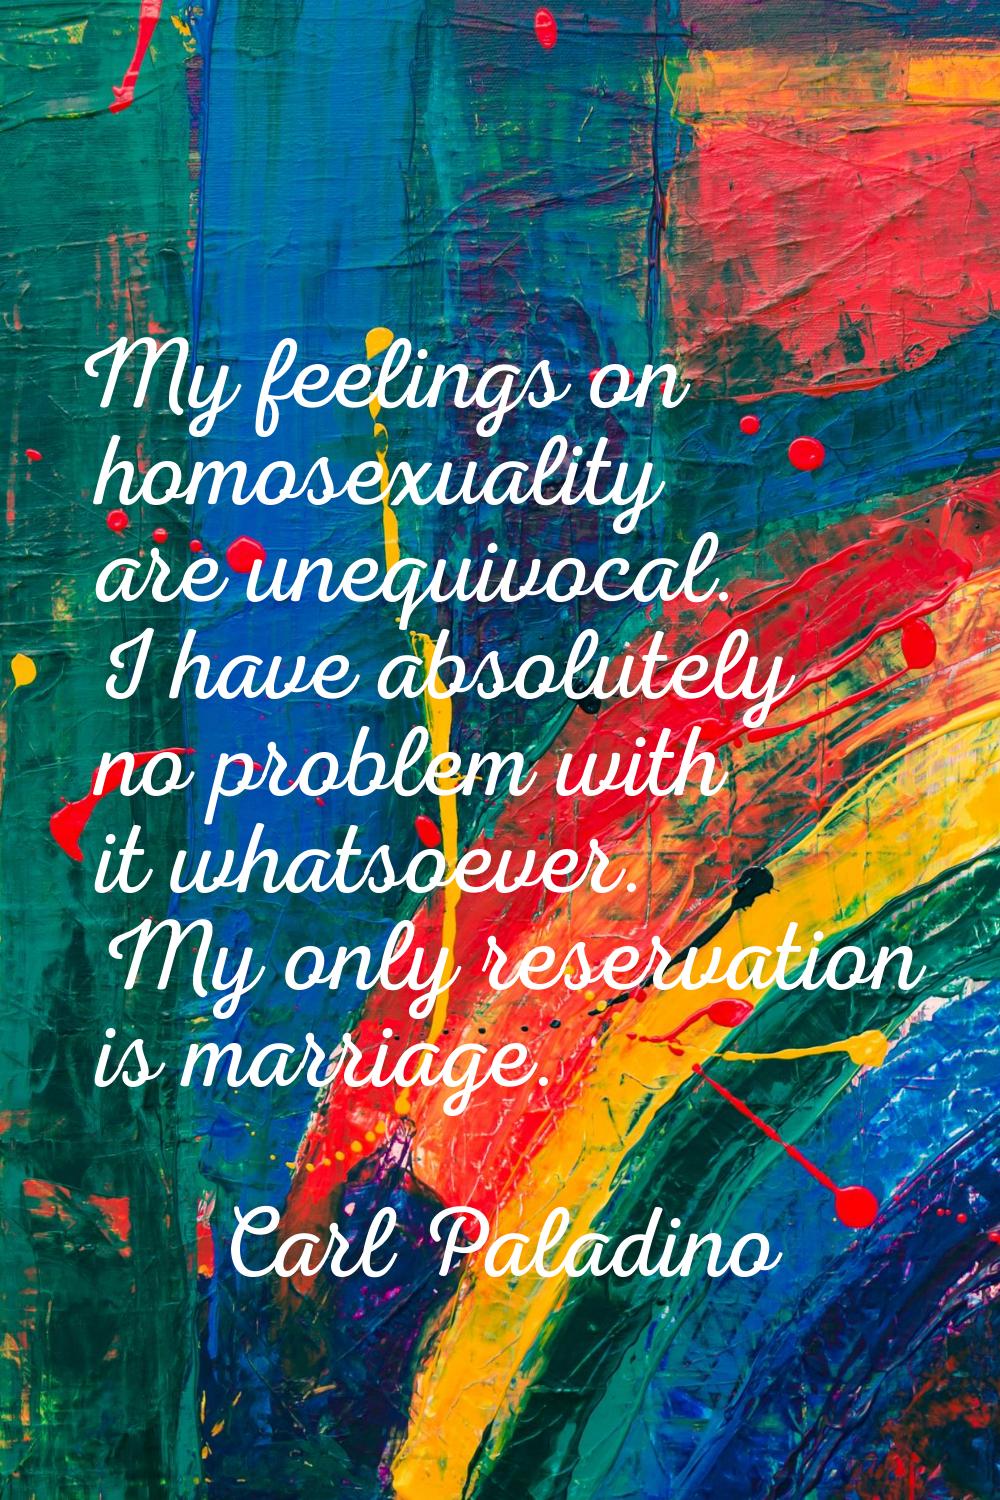 My feelings on homosexuality are unequivocal. I have absolutely no problem with it whatsoever. My o